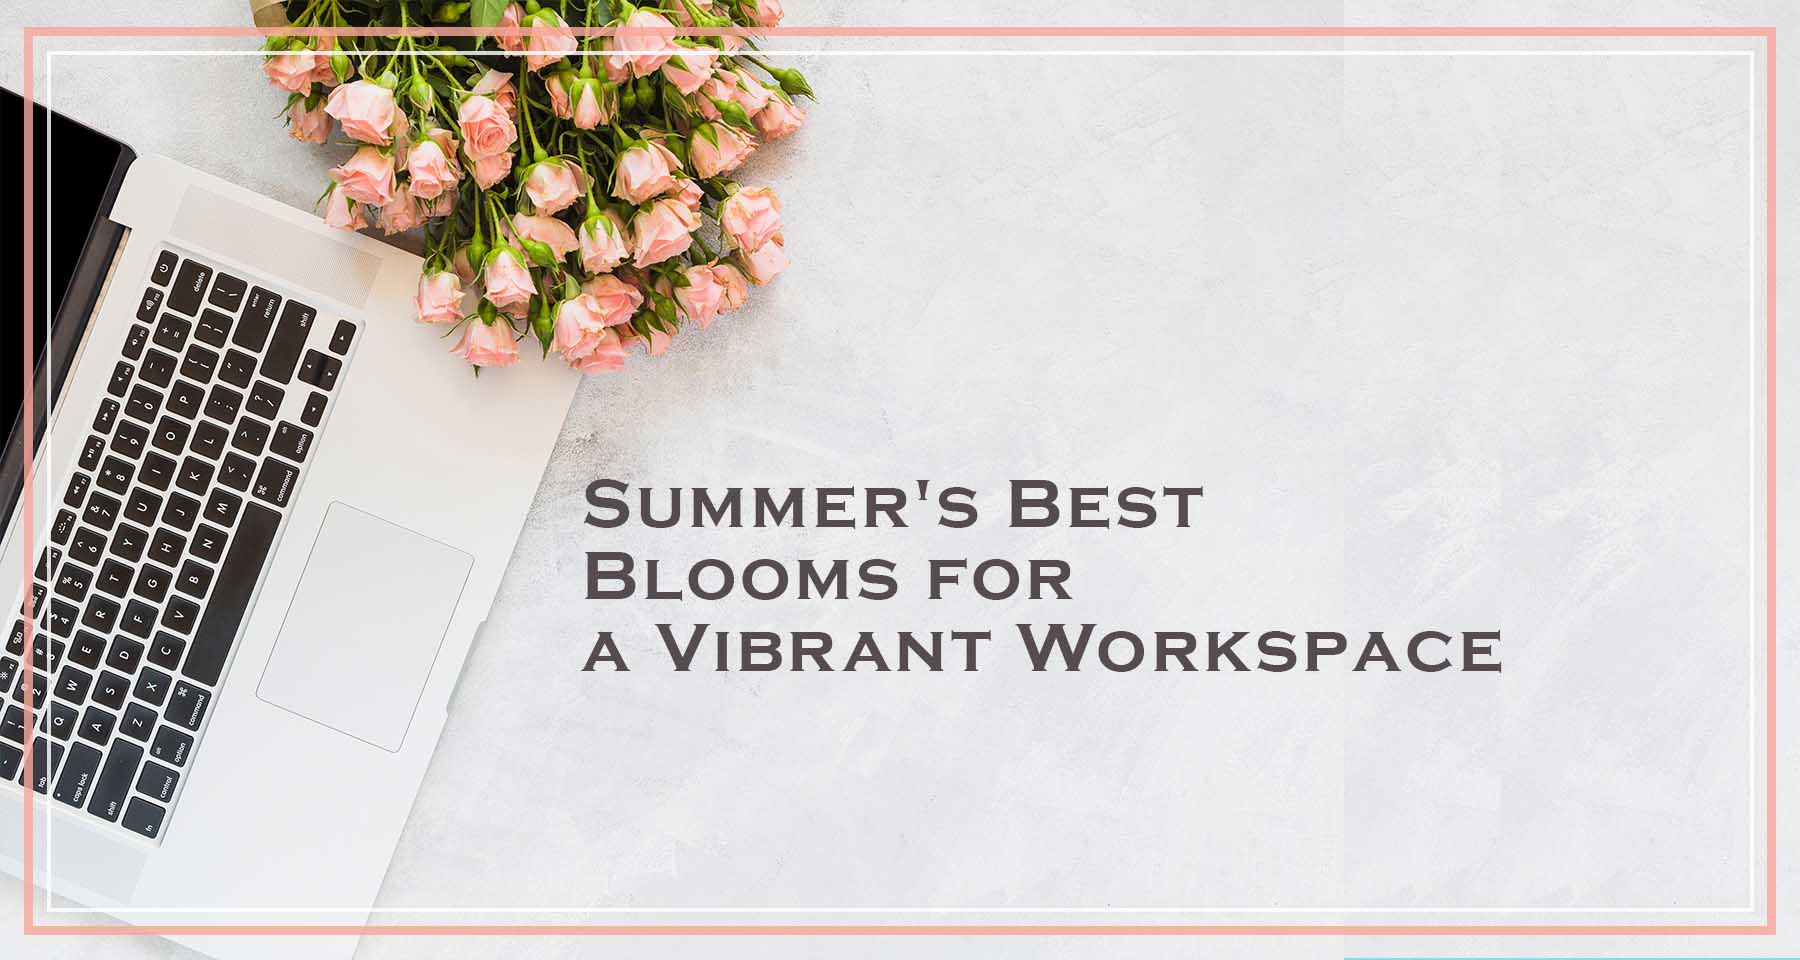 Summer Flowers for corporates